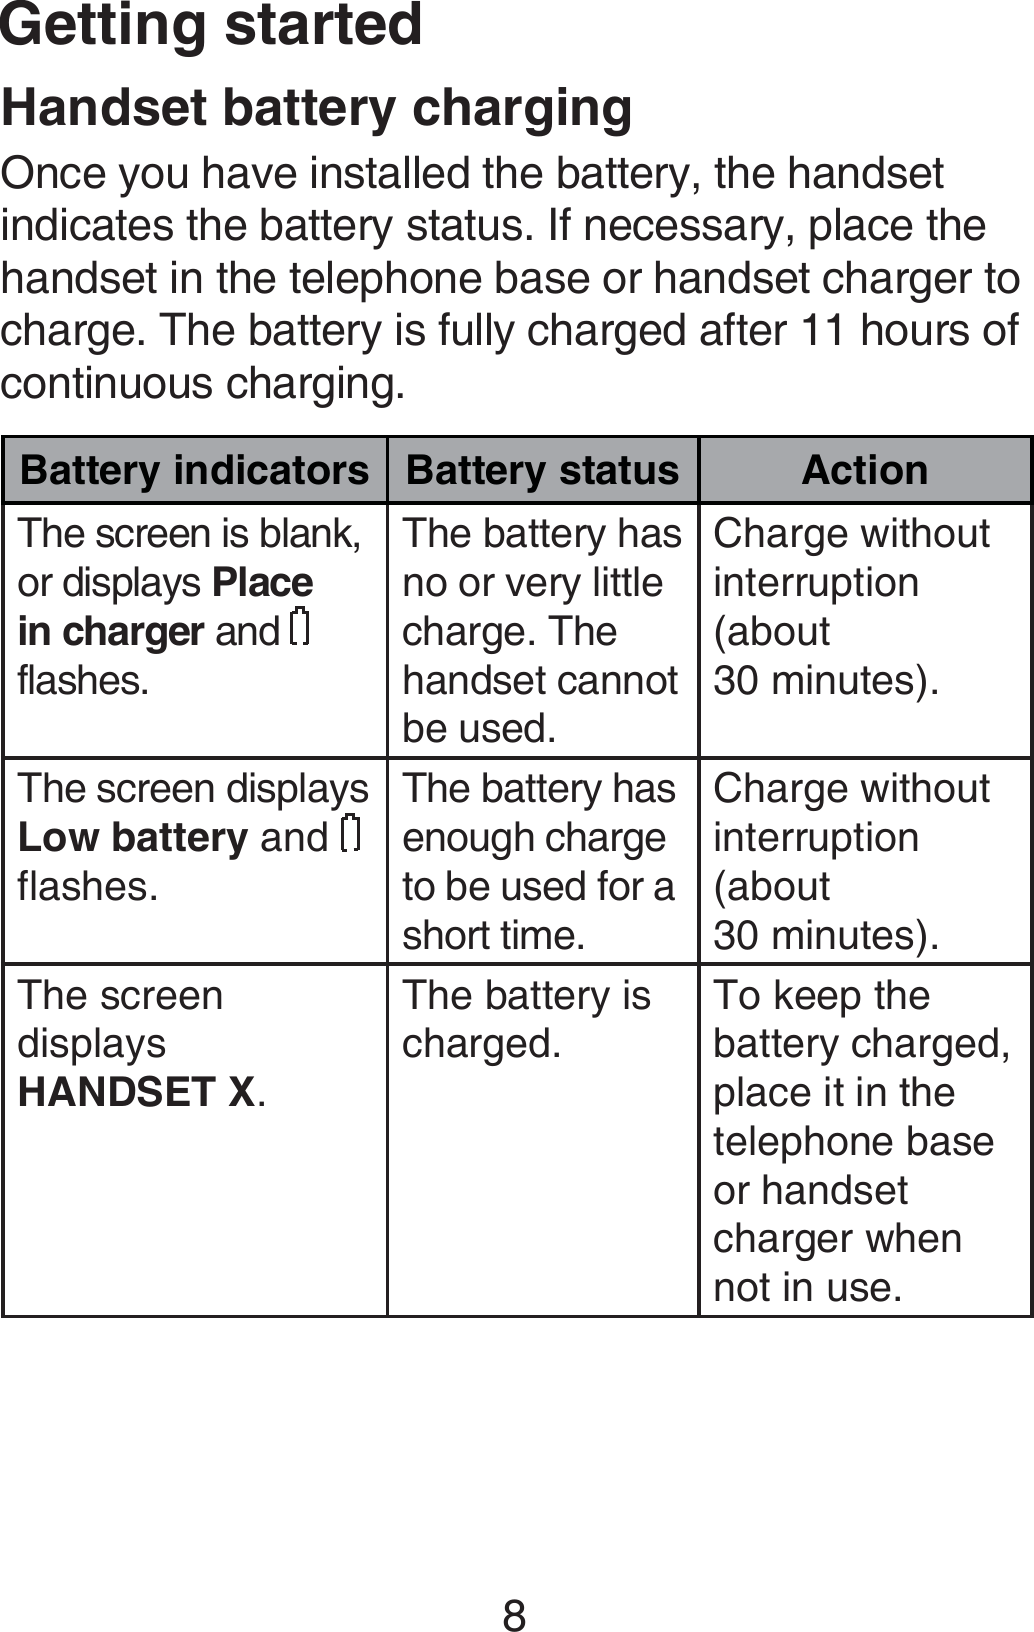 Getting started8Handset battery chargingOnce you have installed the battery, the handset indicates the battery status. If necessary, place the handset in the telephone base or handset charger to charge. The battery is fully charged after 11 hours of continuous charging.Battery indicators Battery status ActionThe screen is blank, or displays Place in charger and   flashes.The battery has no or very little charge. The handset cannot be used.Charge without interruption (about  30 minutes).The screen displays  Low battery and   flashes.The battery has enough charge to be used for a short time.Charge without interruption (about  30 minutes).The screen displays HANDSET X.The battery is charged.To keep the battery charged, place it in the telephone base or handset charger when not in use.